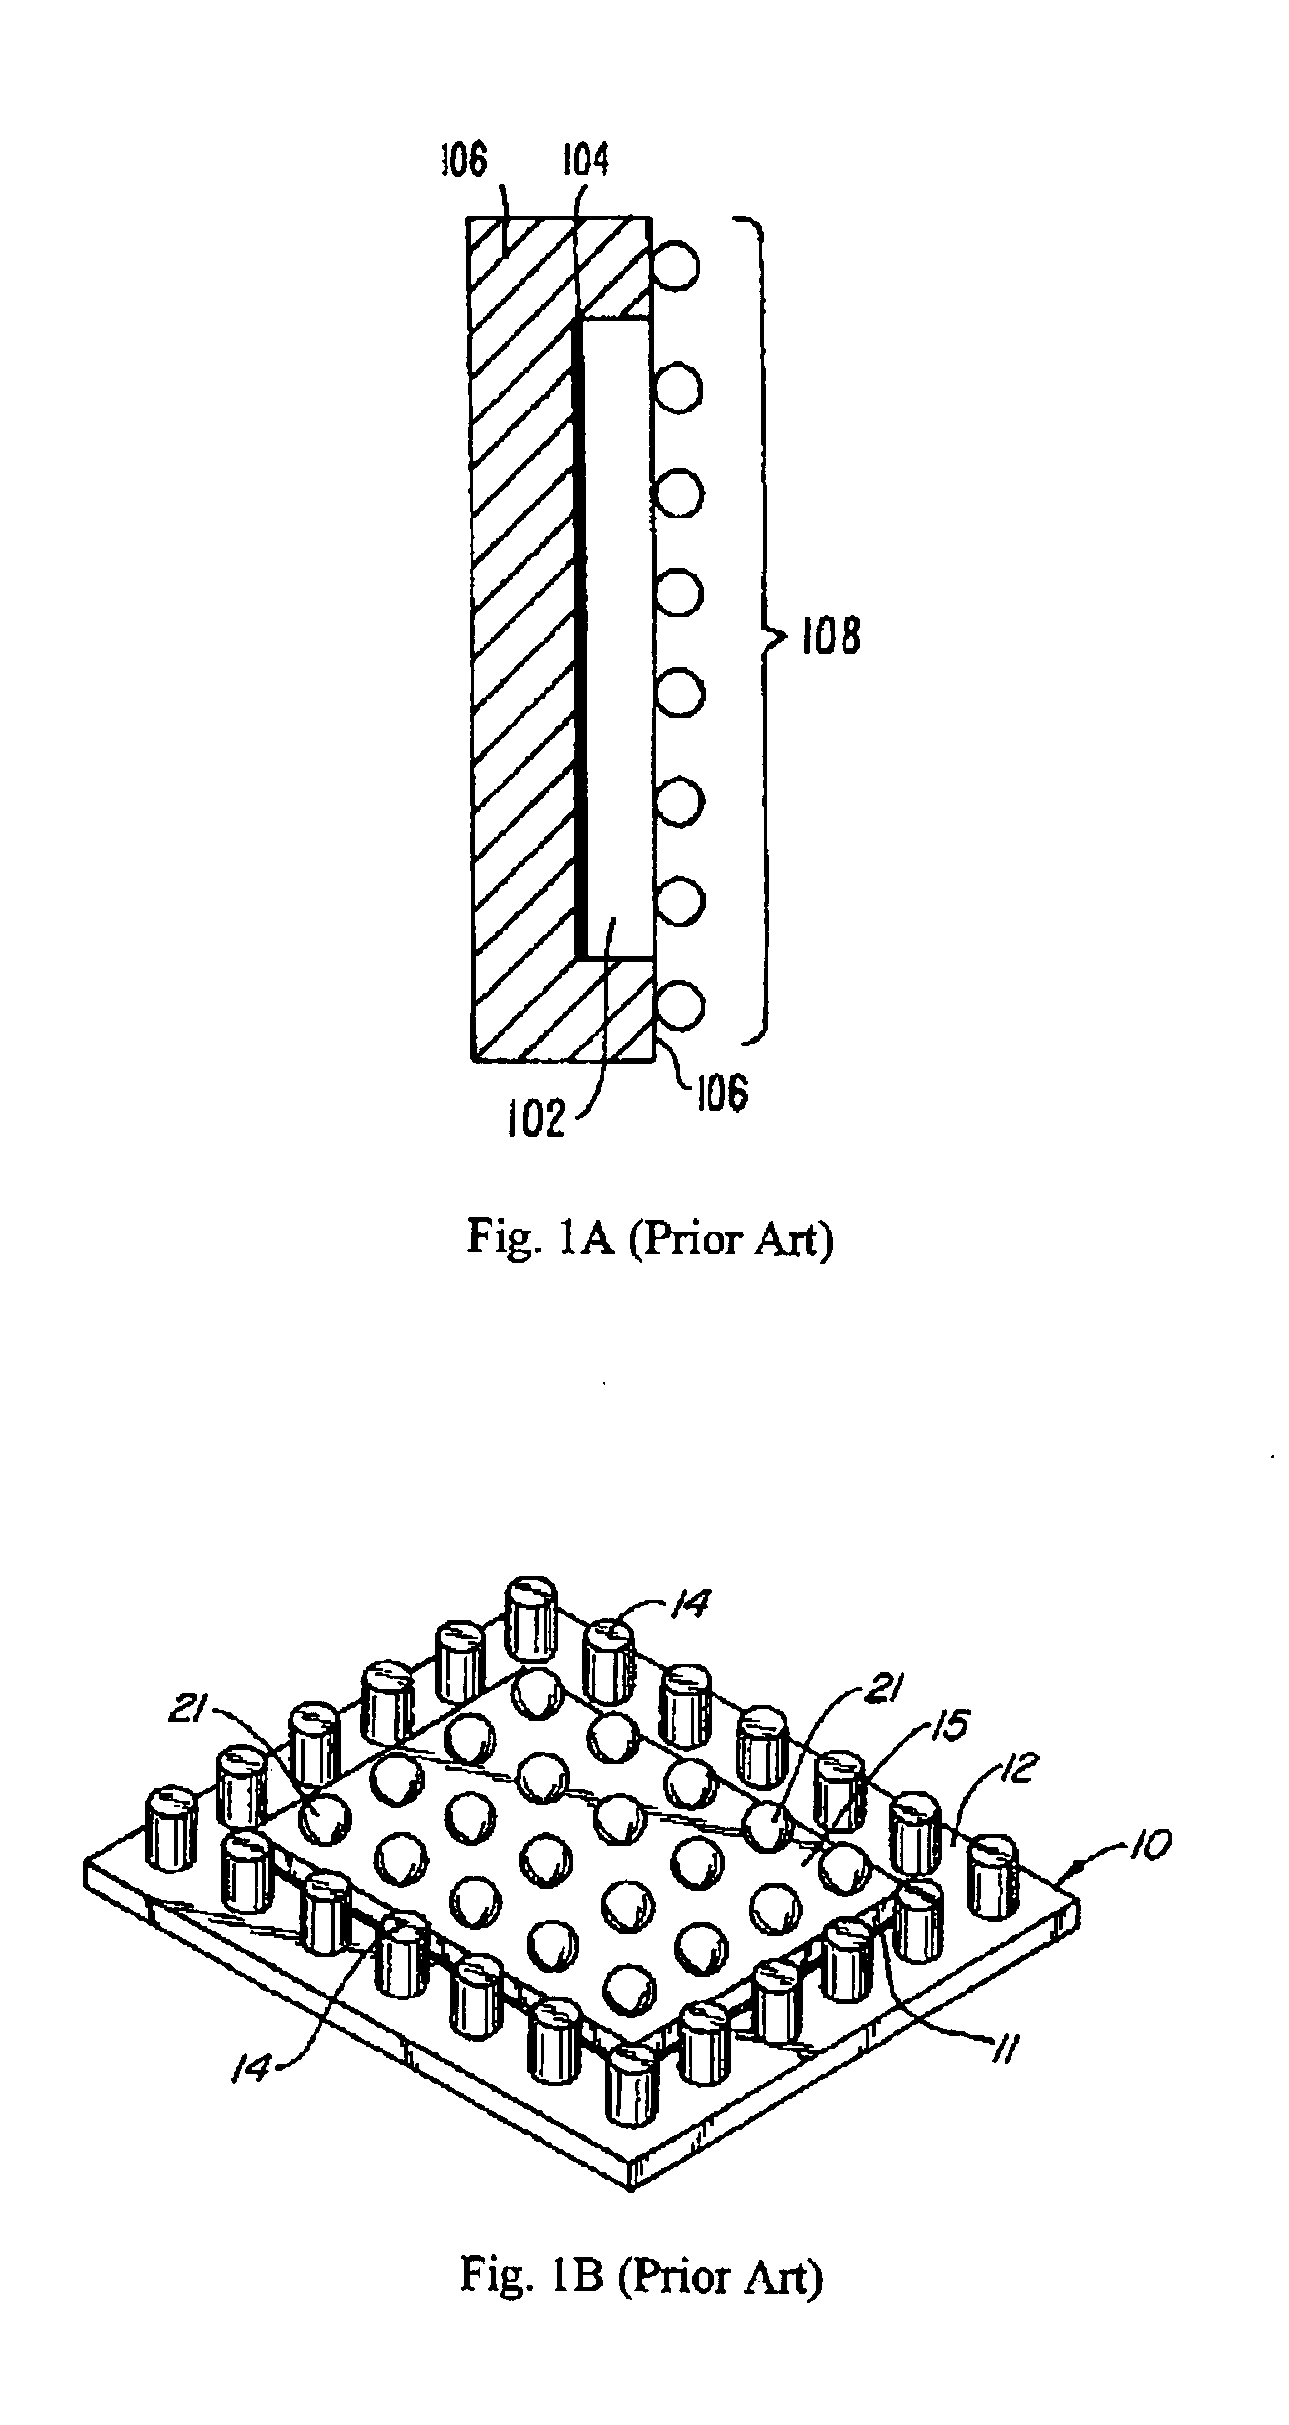 Packaging configurations for vertical electronic devices using conductive traces disposed on laminated board layers